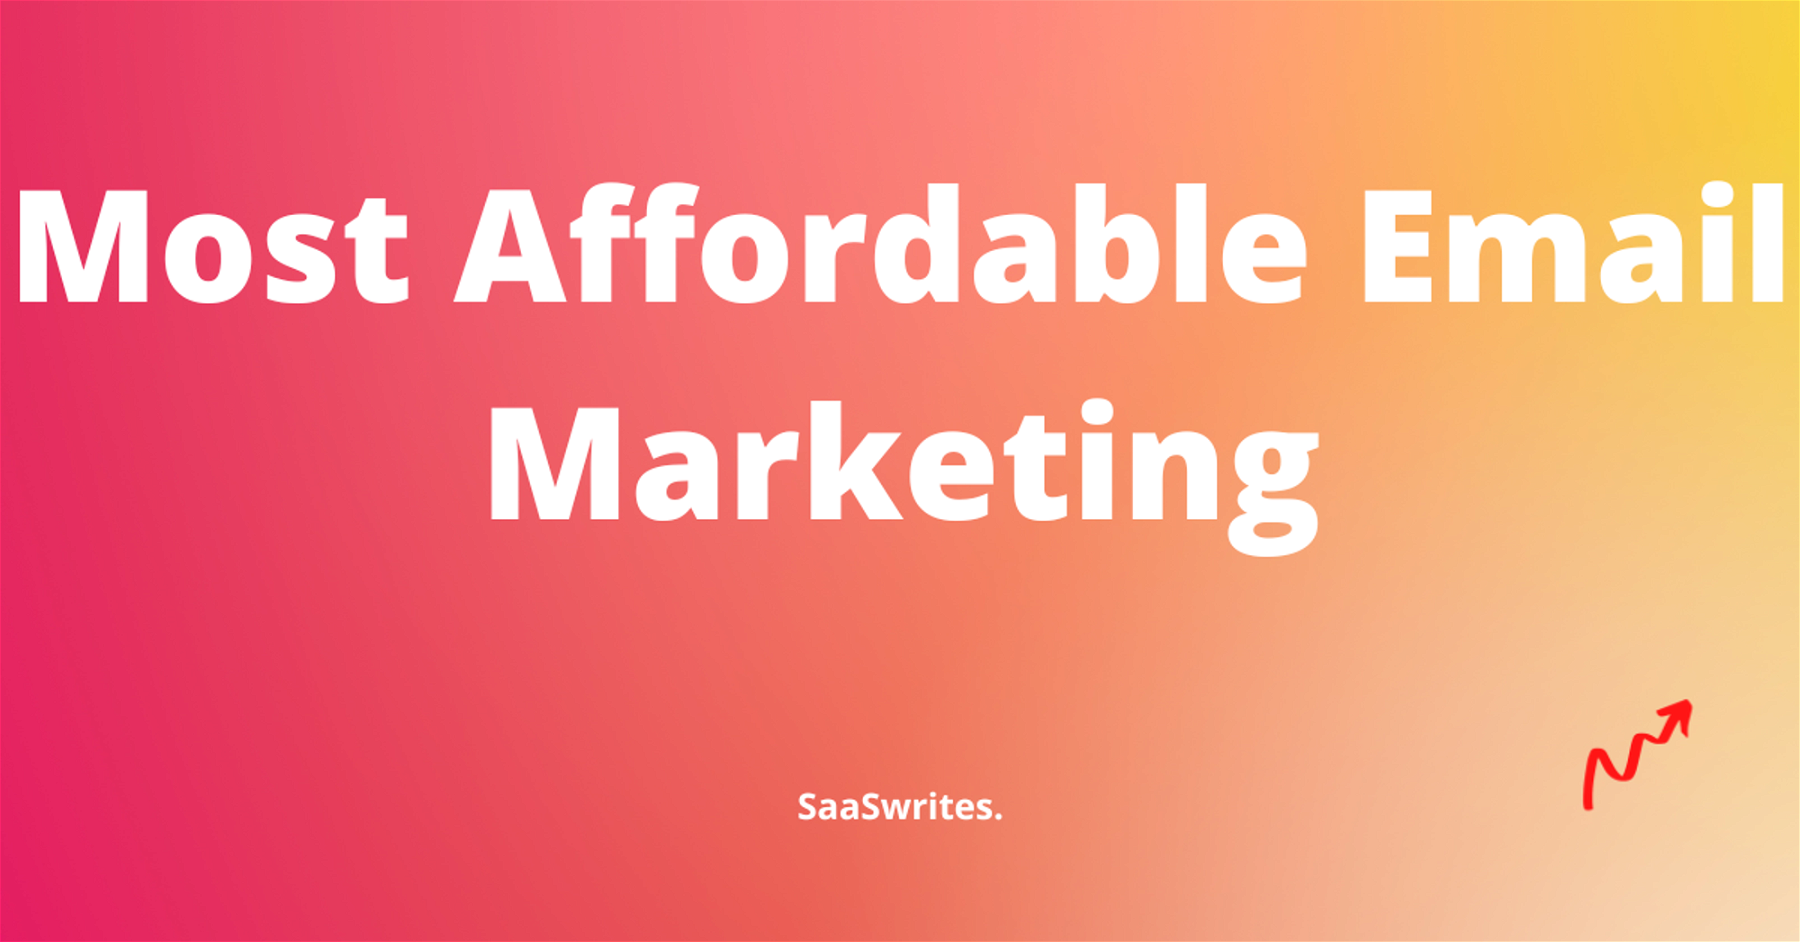 Most Affordable Email Marketing